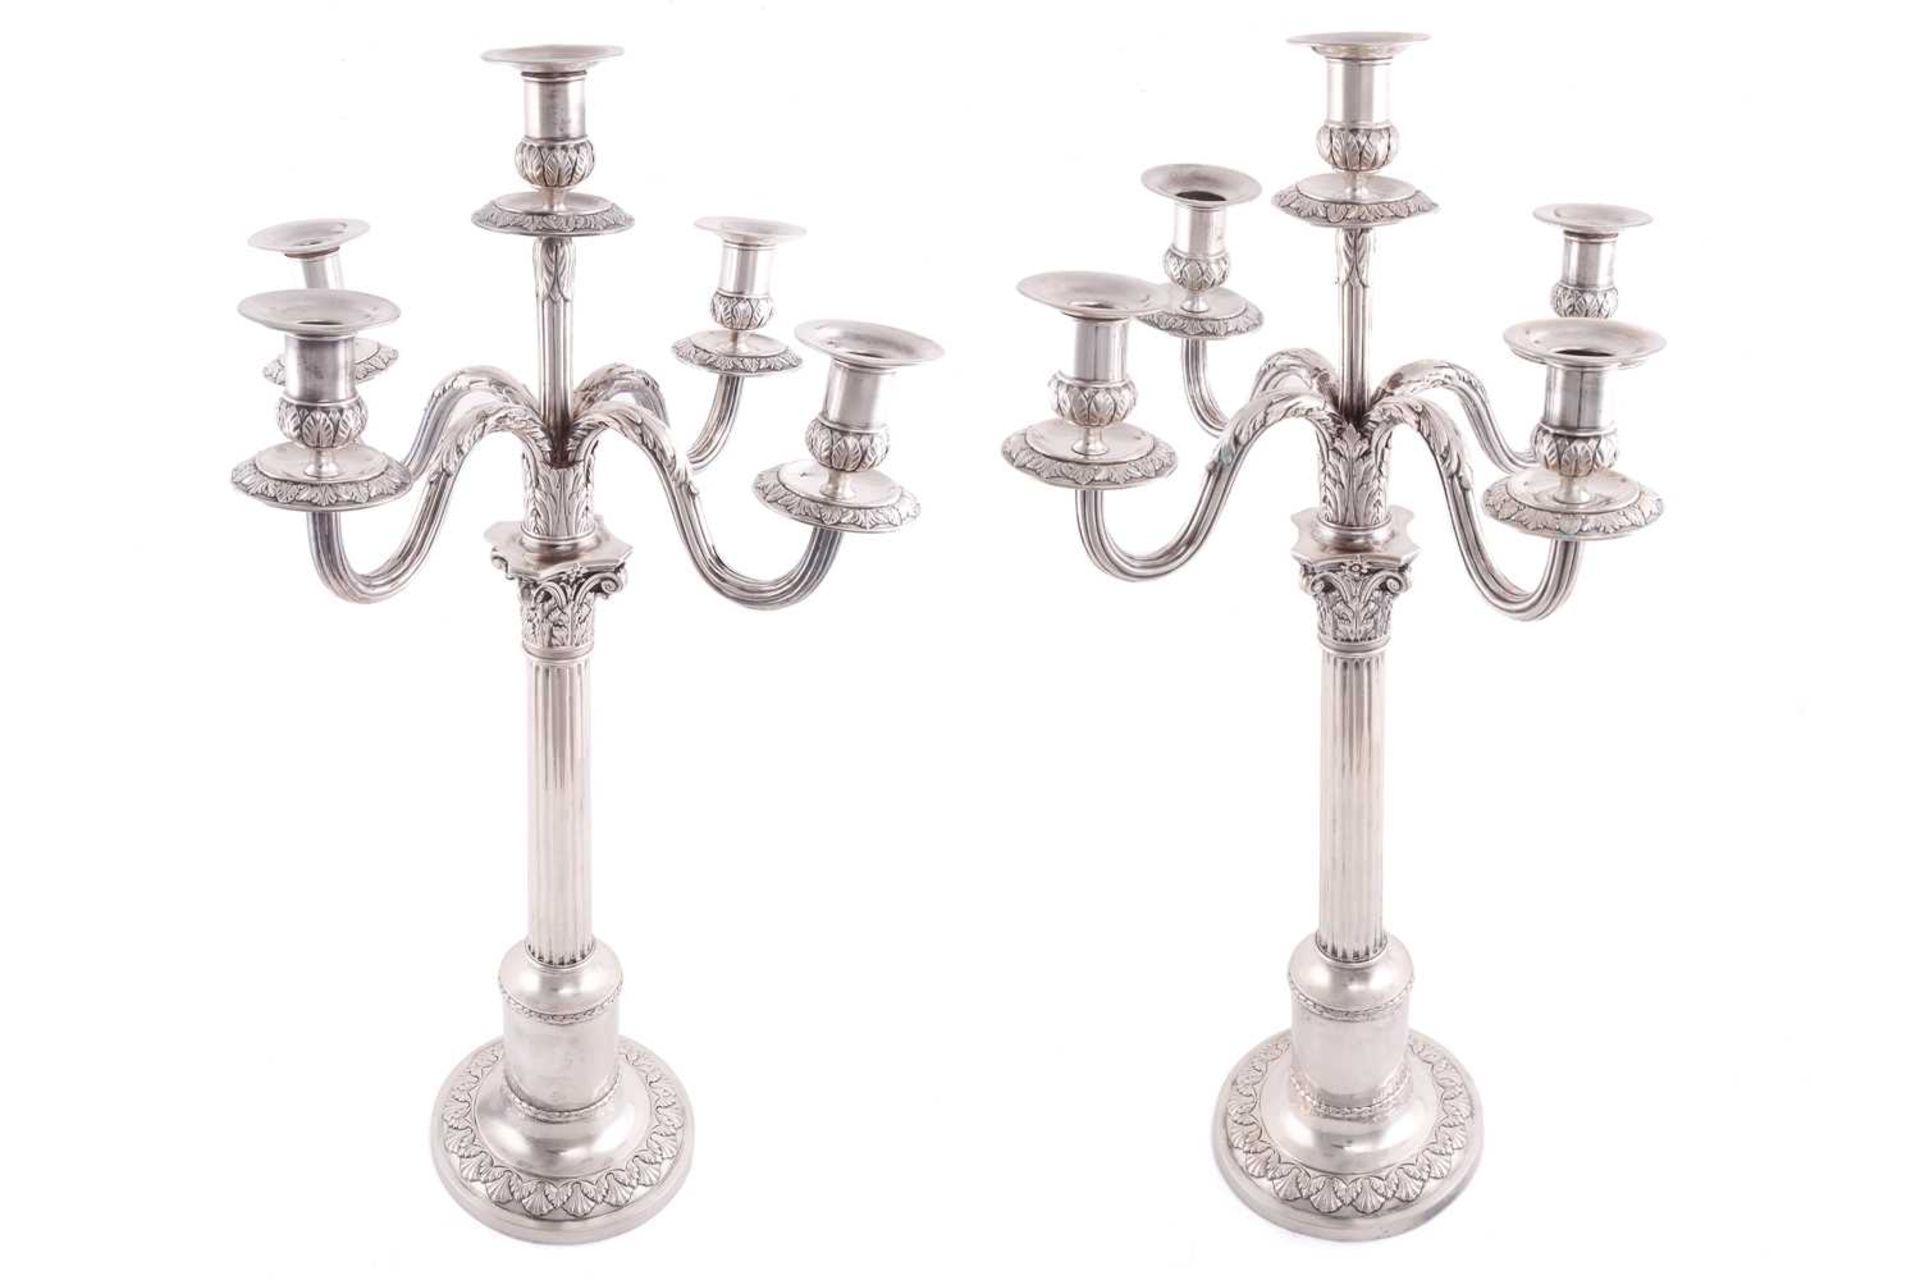 A pair of German 800 standard candelabra, of Corinthian column form with detachable five branch